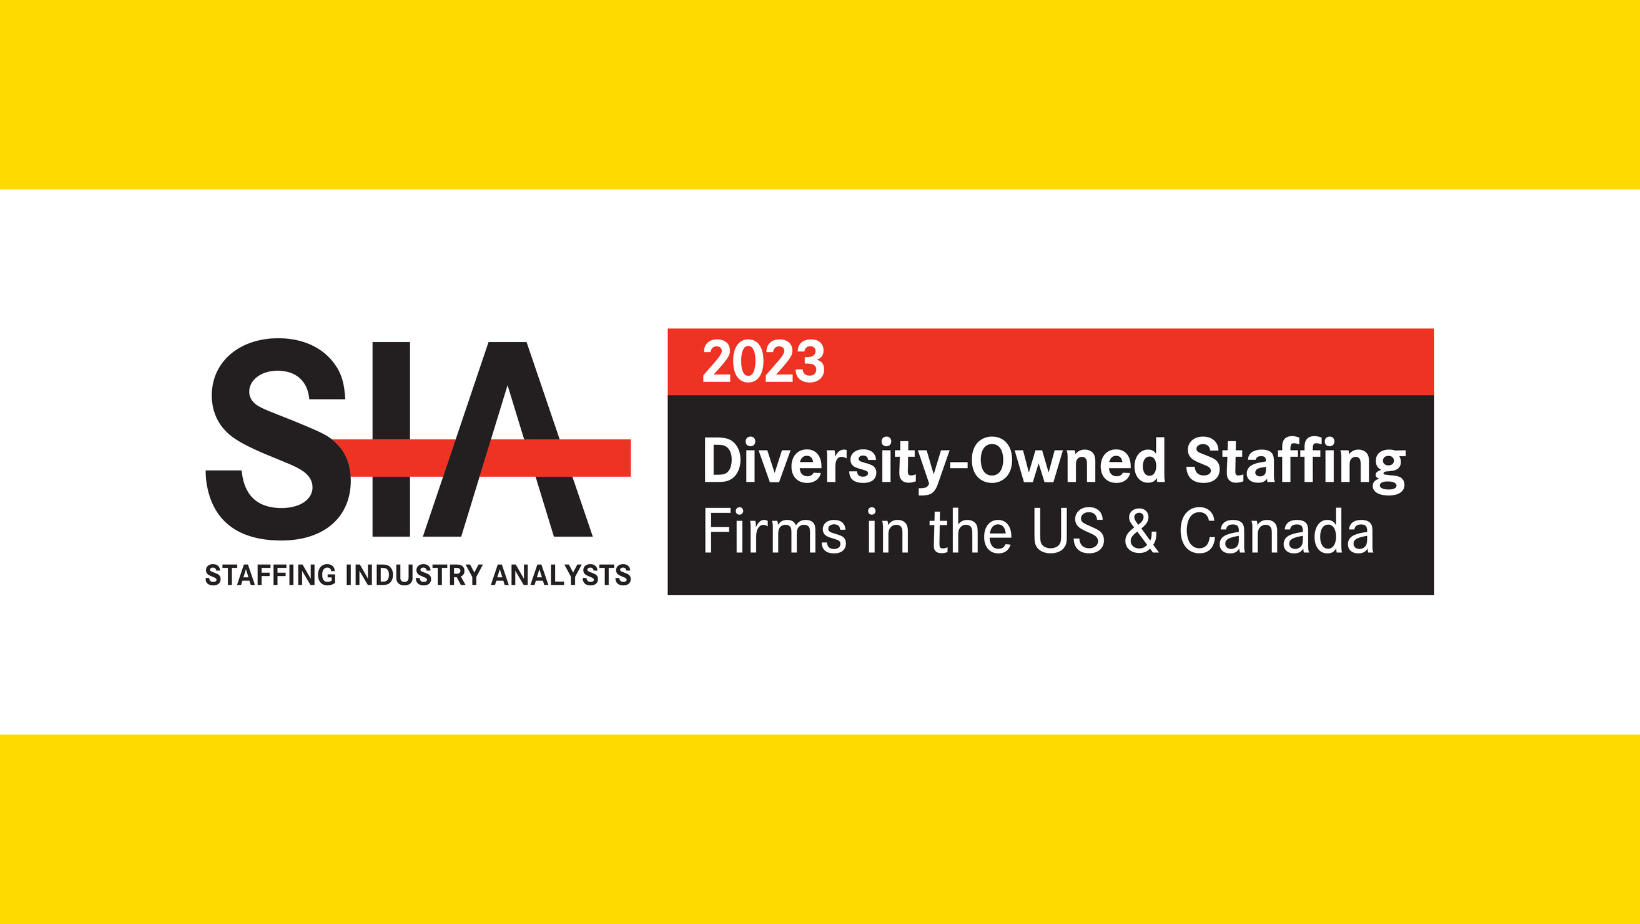 SPECTRAFORCE® Spotlighted on SIA’s 2023 Diversity-Owned Staffing Firms List